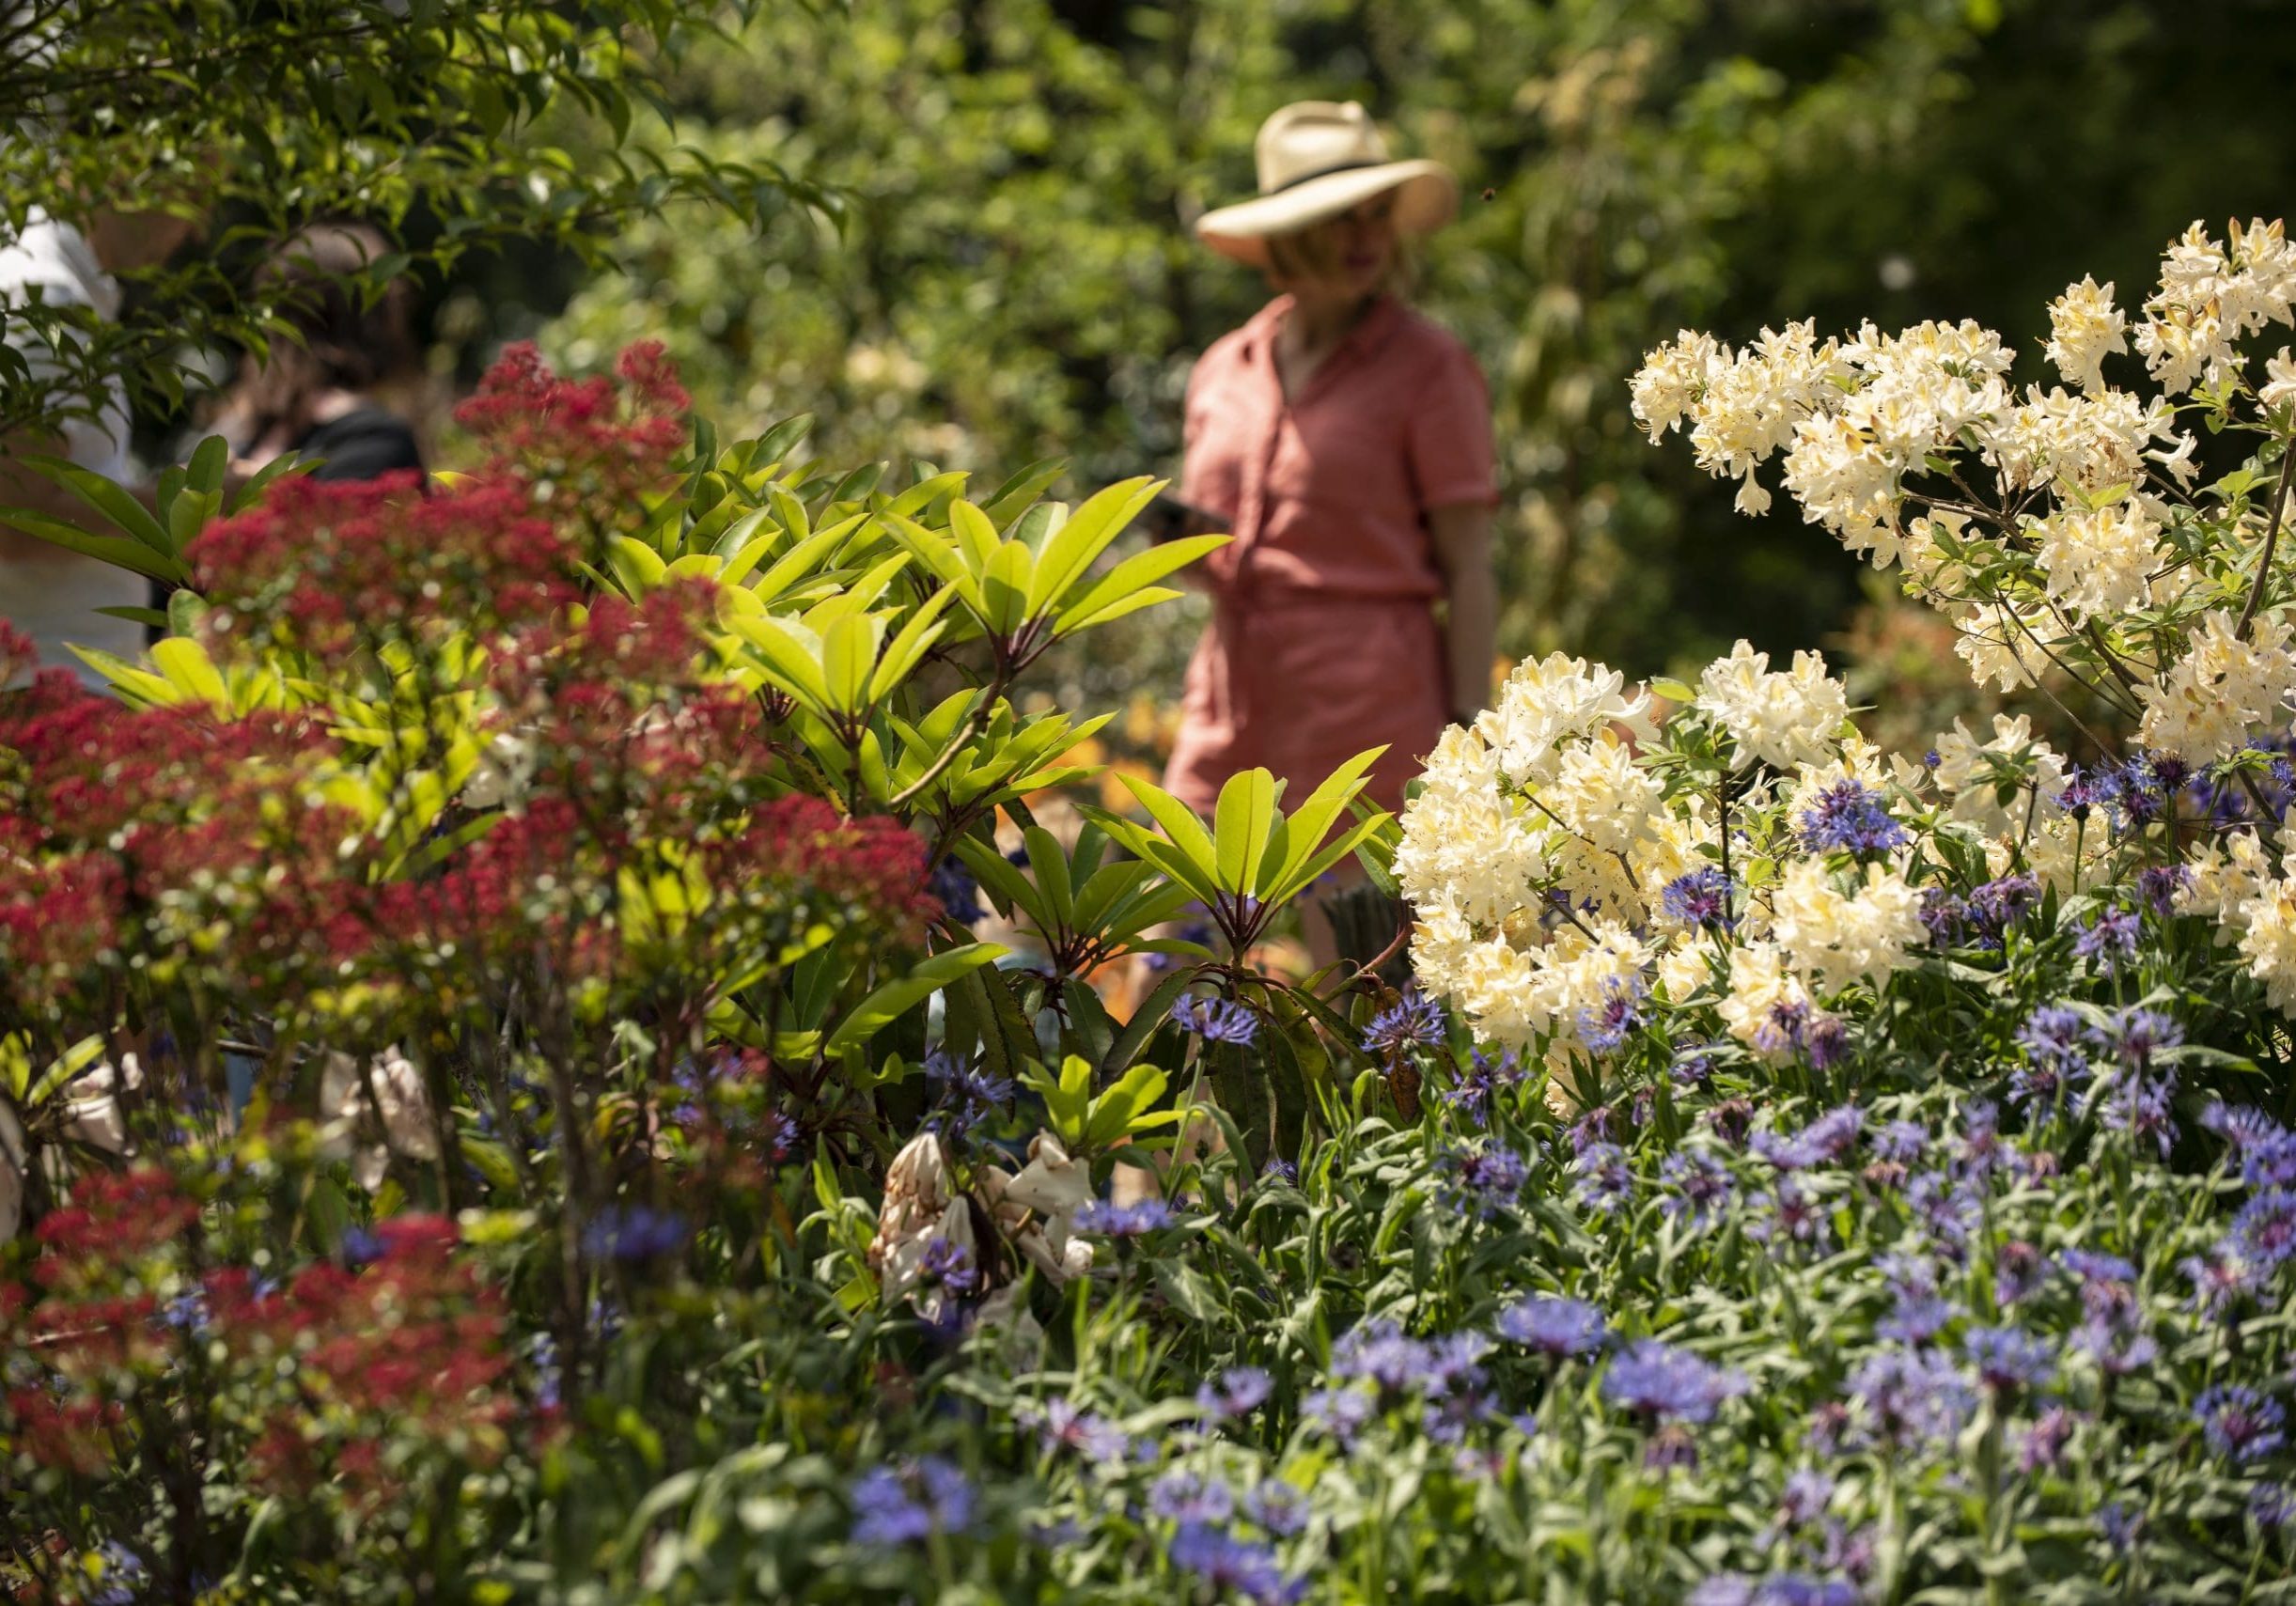 Woman standing in a sunny garden admiring a lush border of flowers.